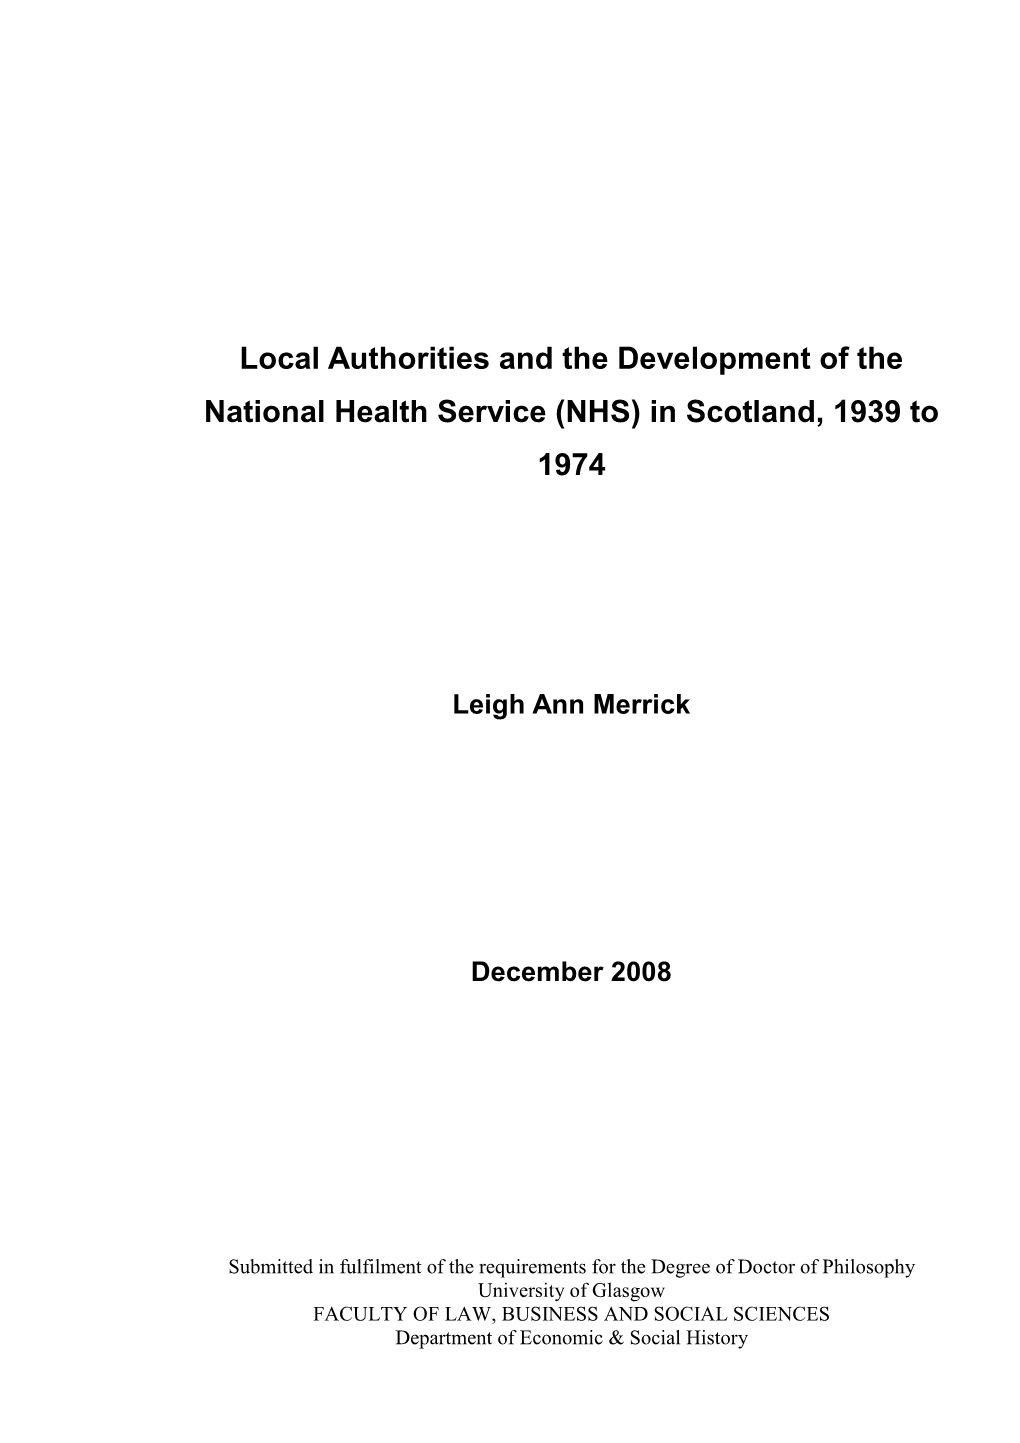 Local Authorities and the Development of the National Health Service (NHS) in Scotland, 1939 to 1974